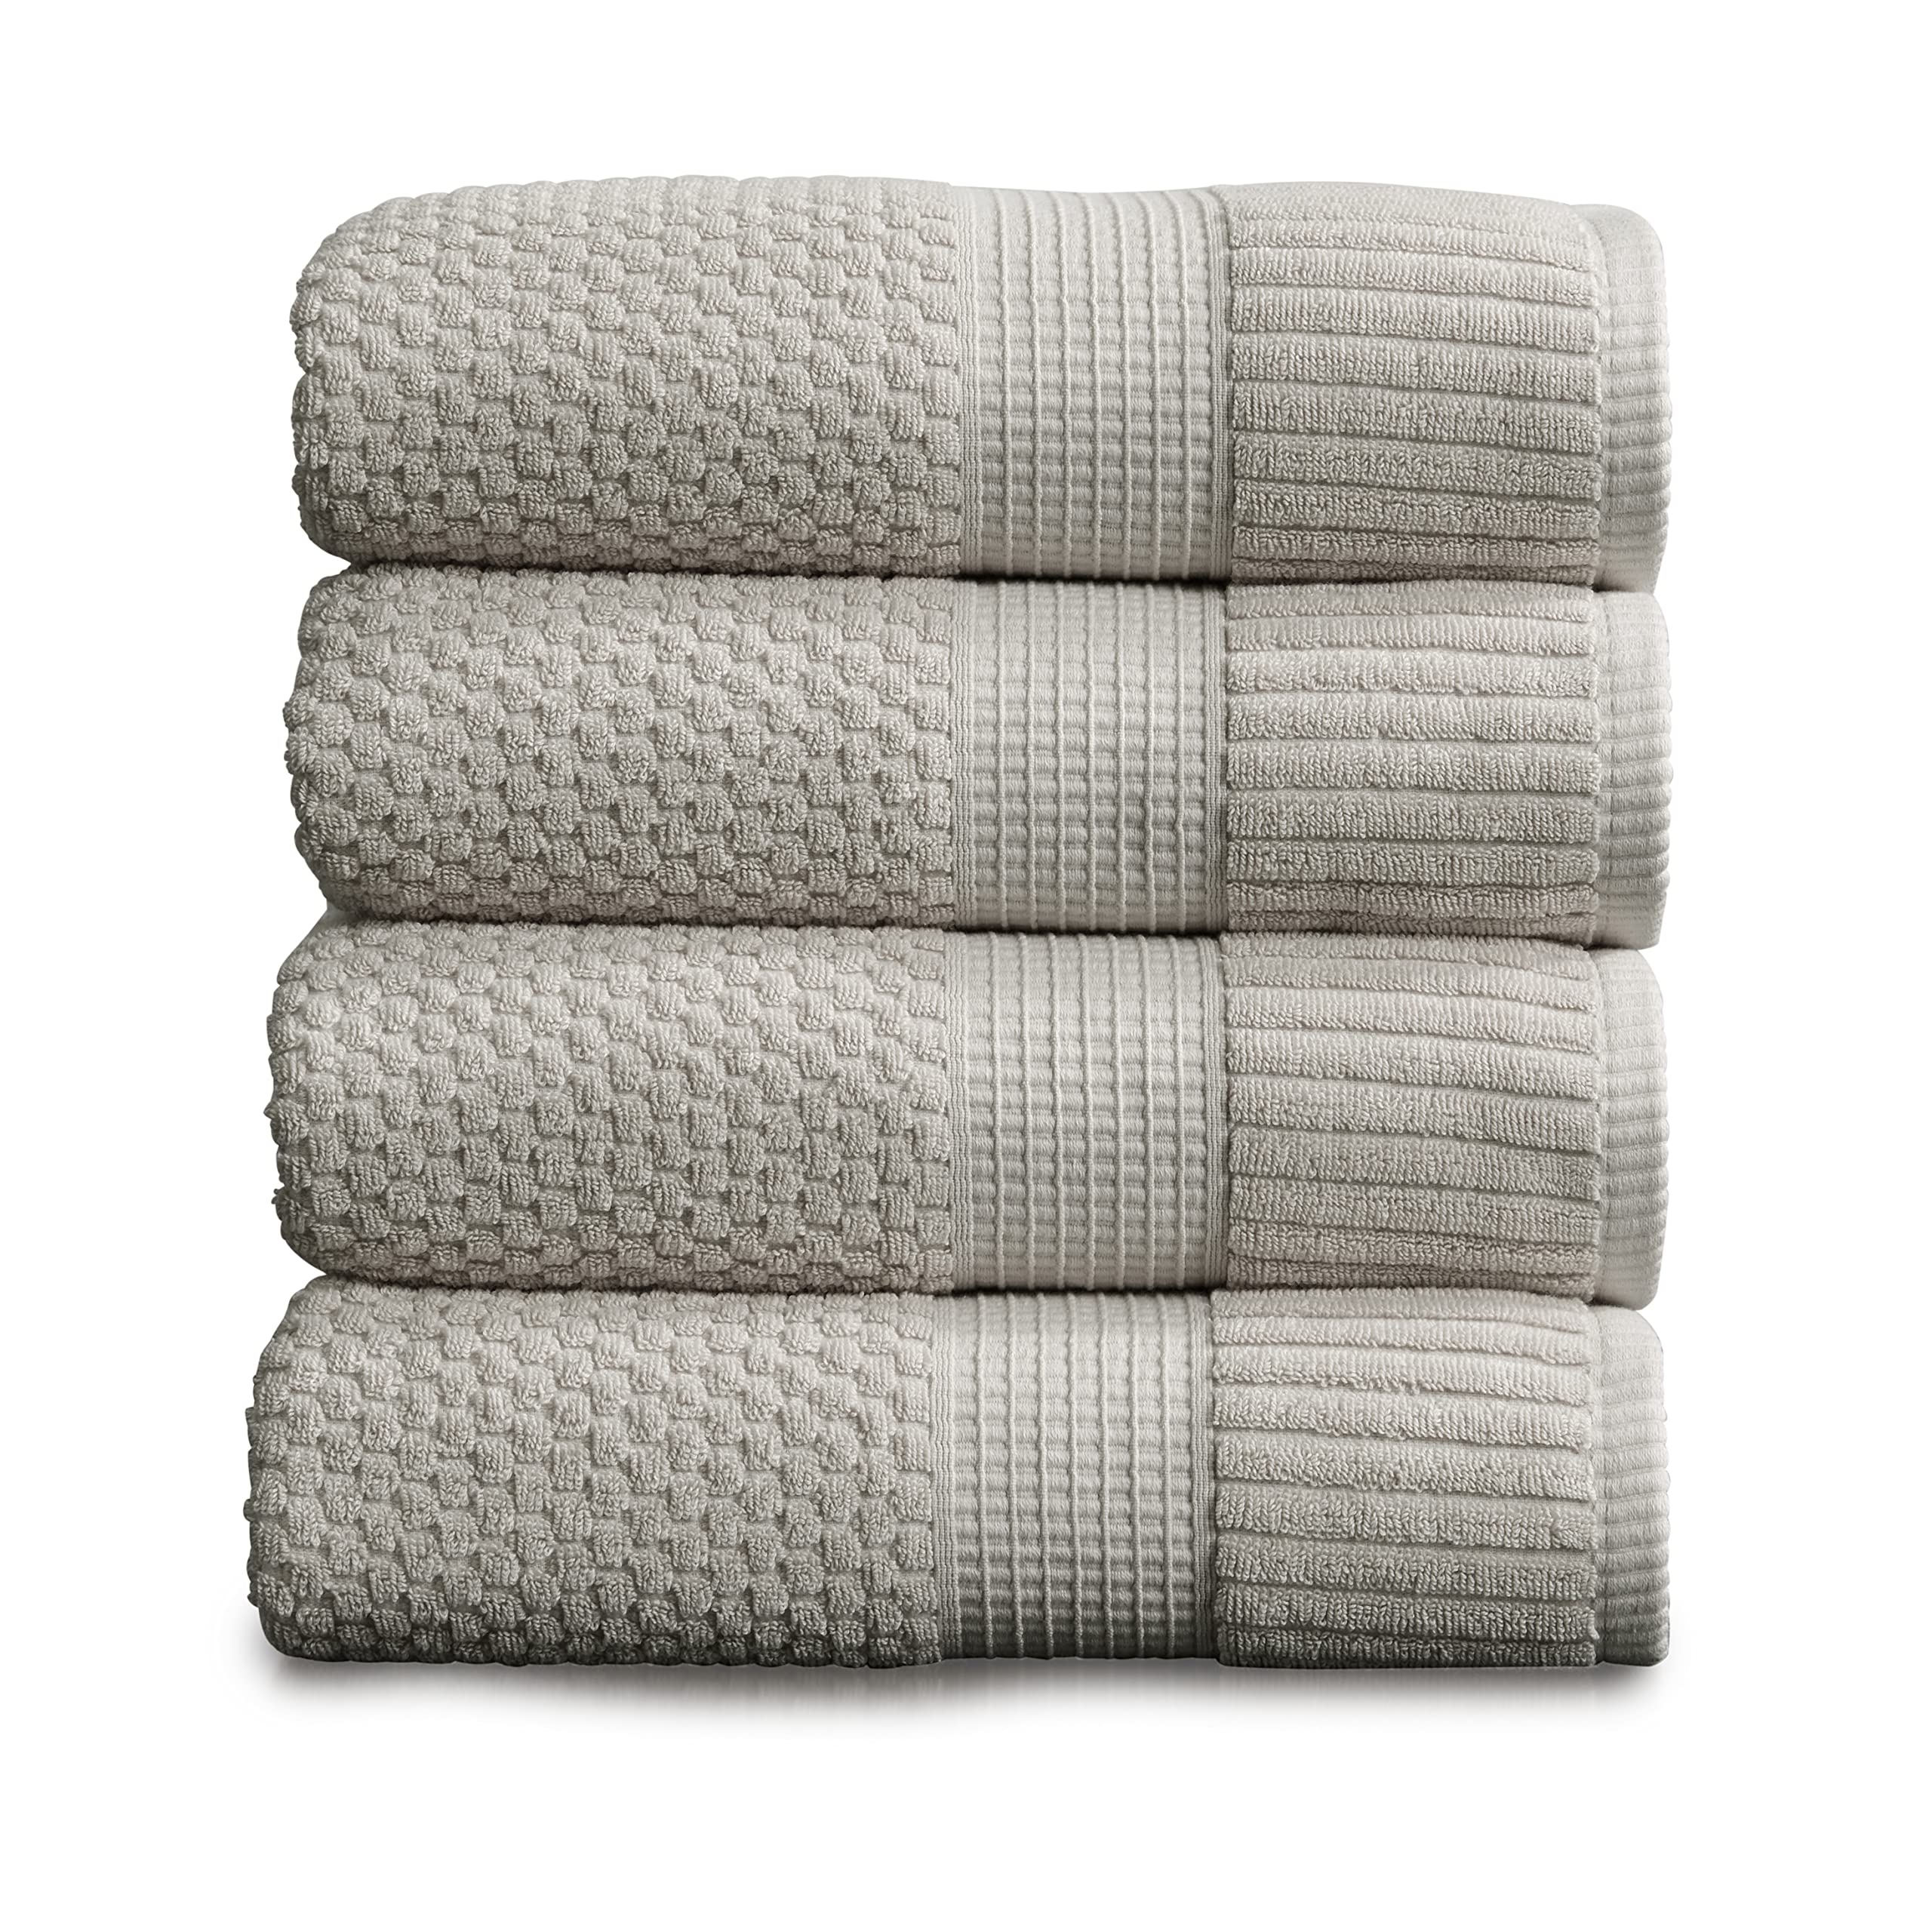 Tens Towels 4 Pc Silver Grey Bath Towels Set, 2 Ply Low Twist Finest  Cotton, 27 x 54 Inches, Luxurious Bath Towels for Bathroom, Extra Soft 